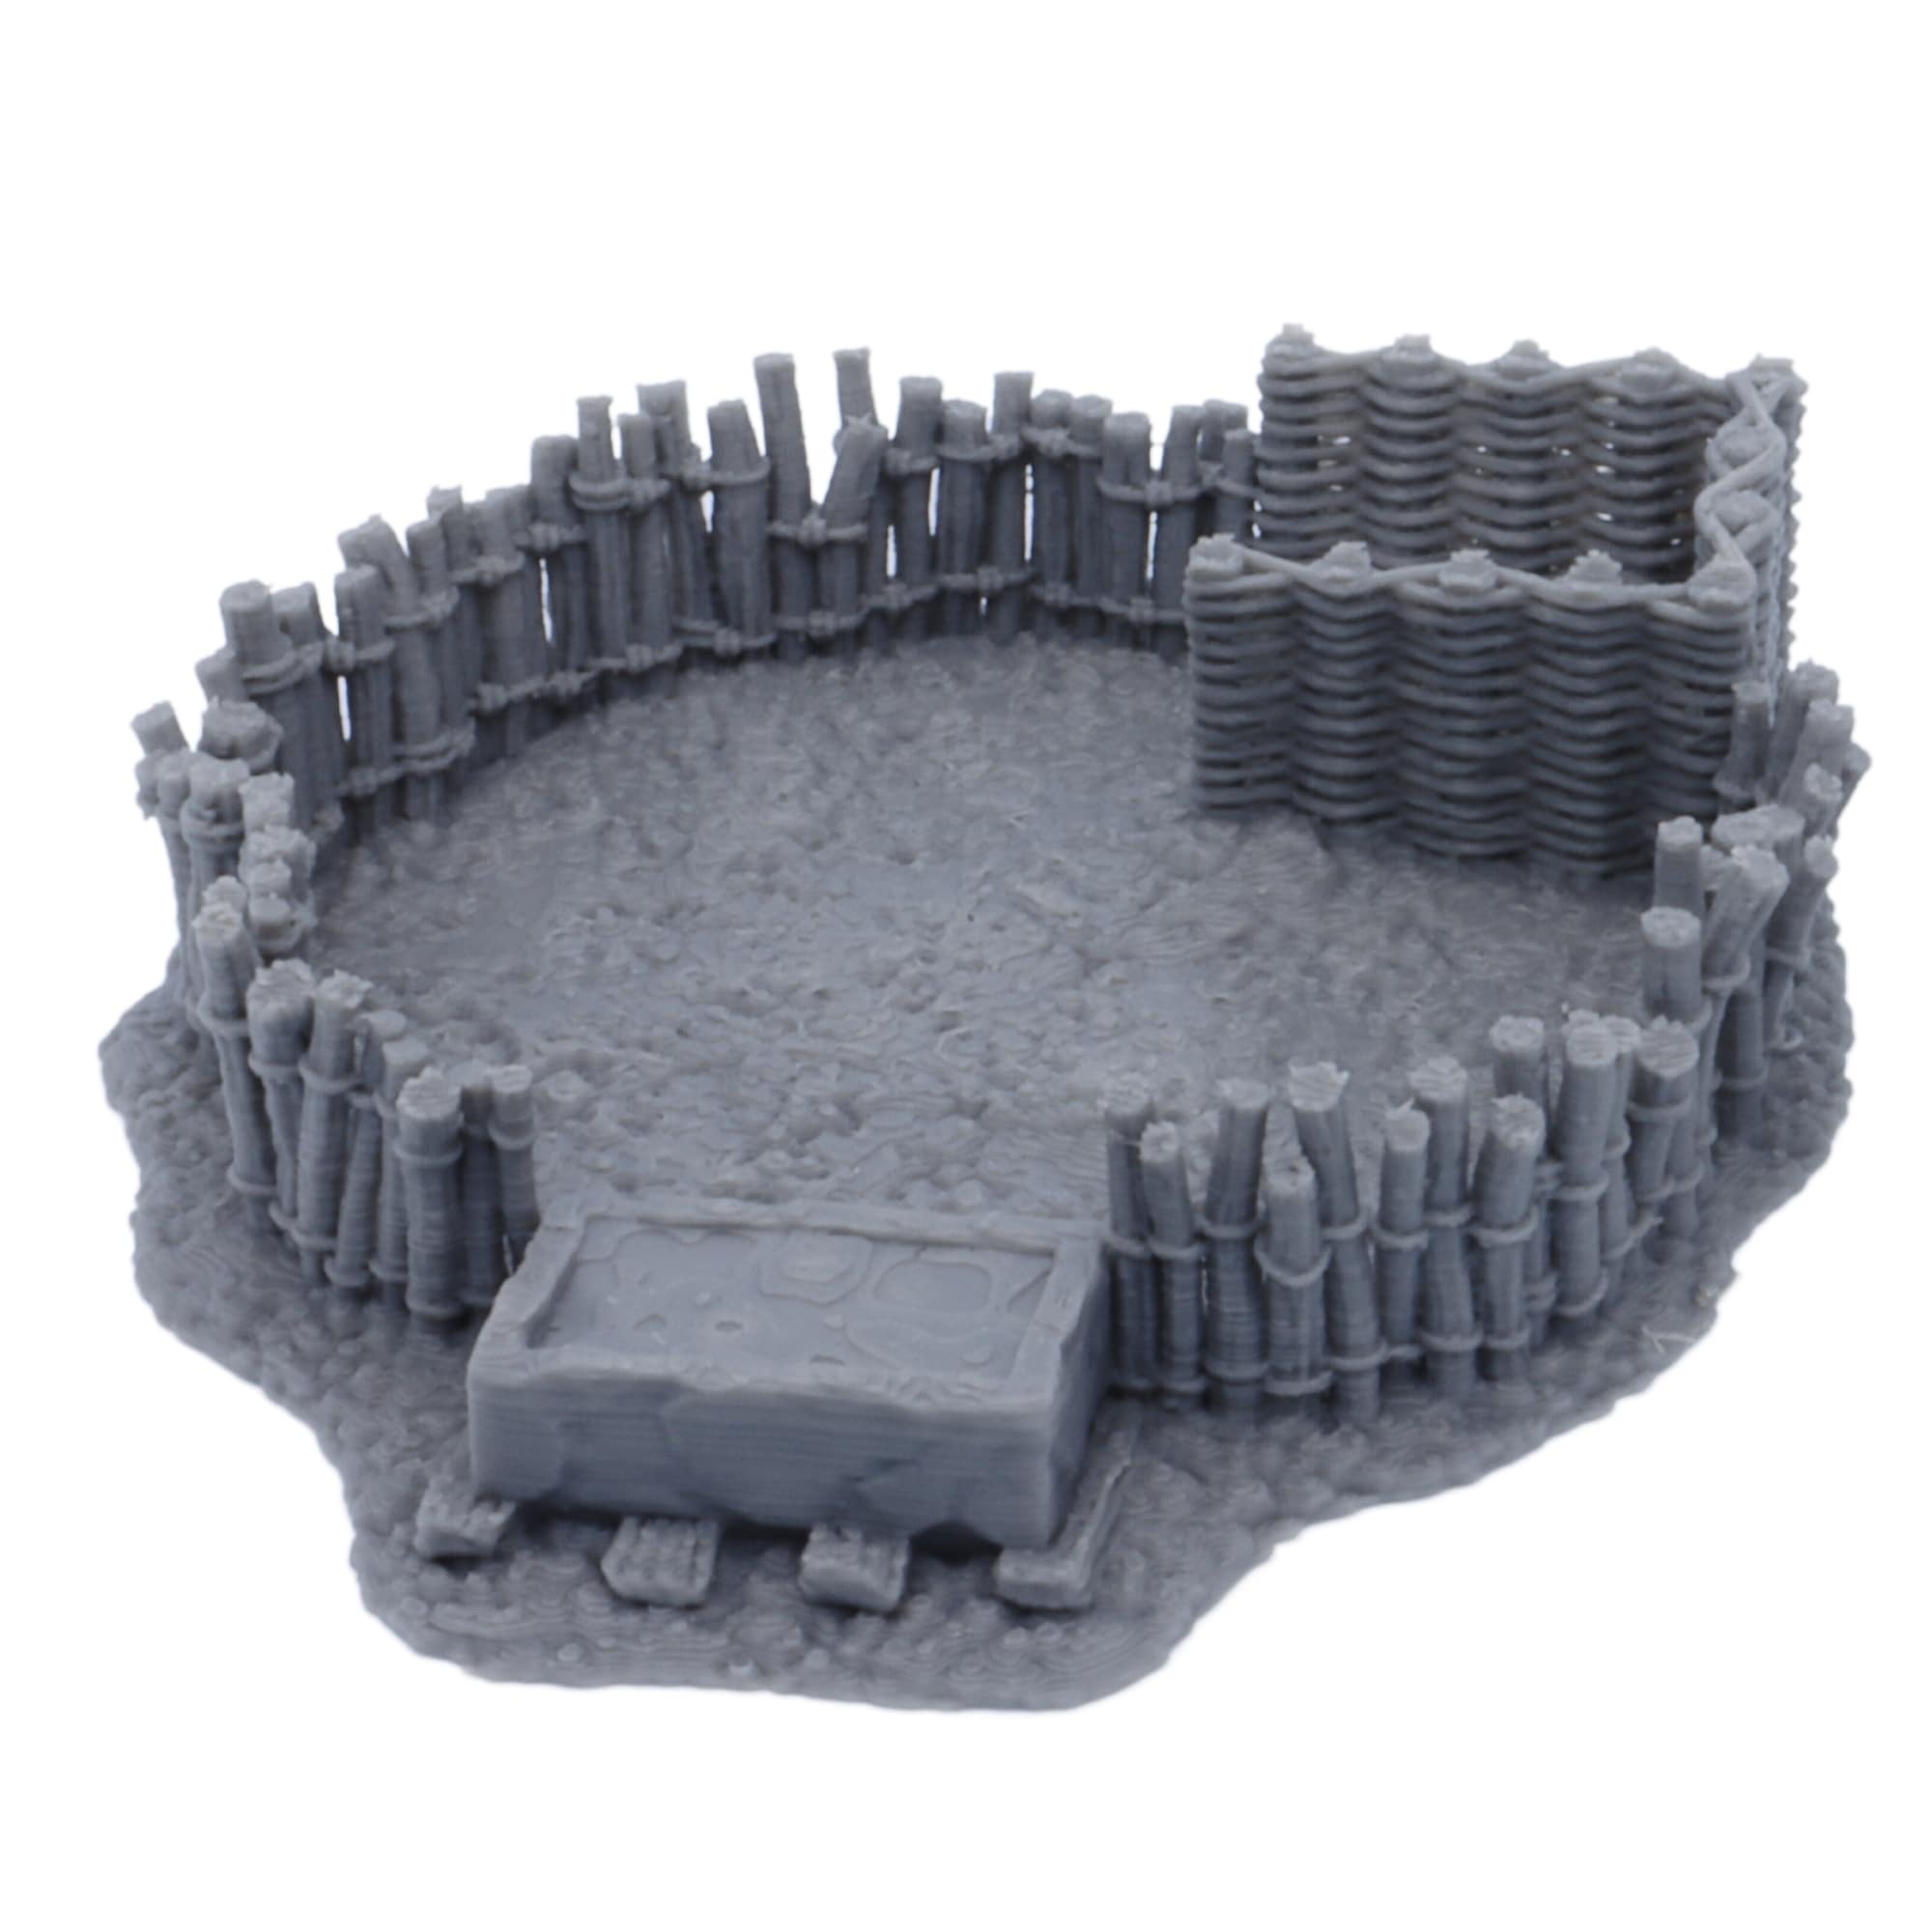 Fantasy Scenery Designed by Printable Scenery